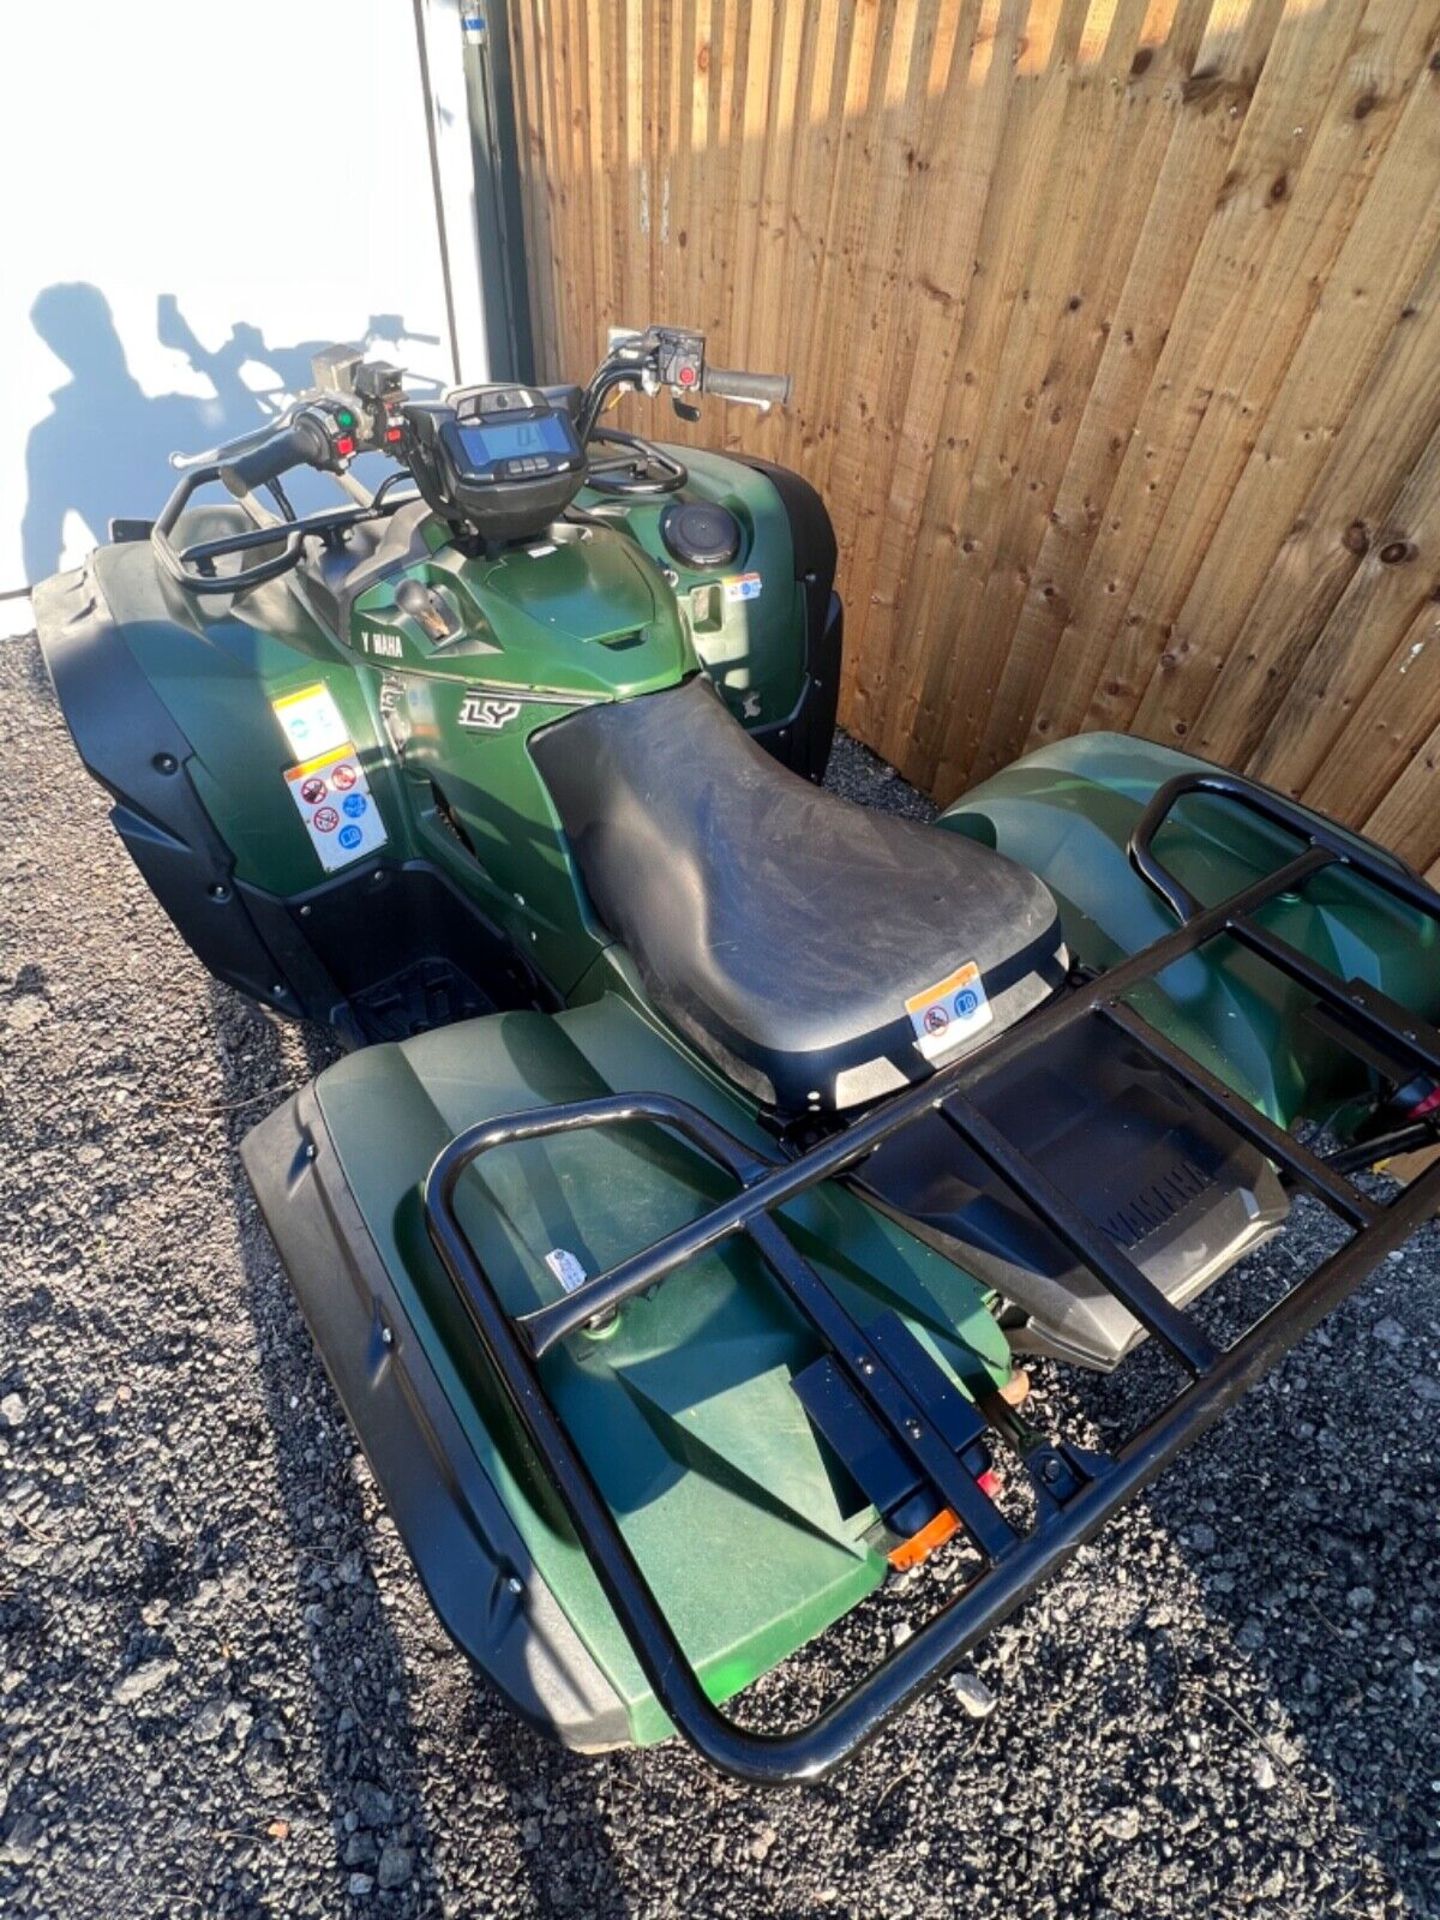 YAMAHA GRIZZLY 700 1300 HOURS FROM NEW 4X4 ROAD LEGAL FARM QUAD BIKE ATV - Image 7 of 13